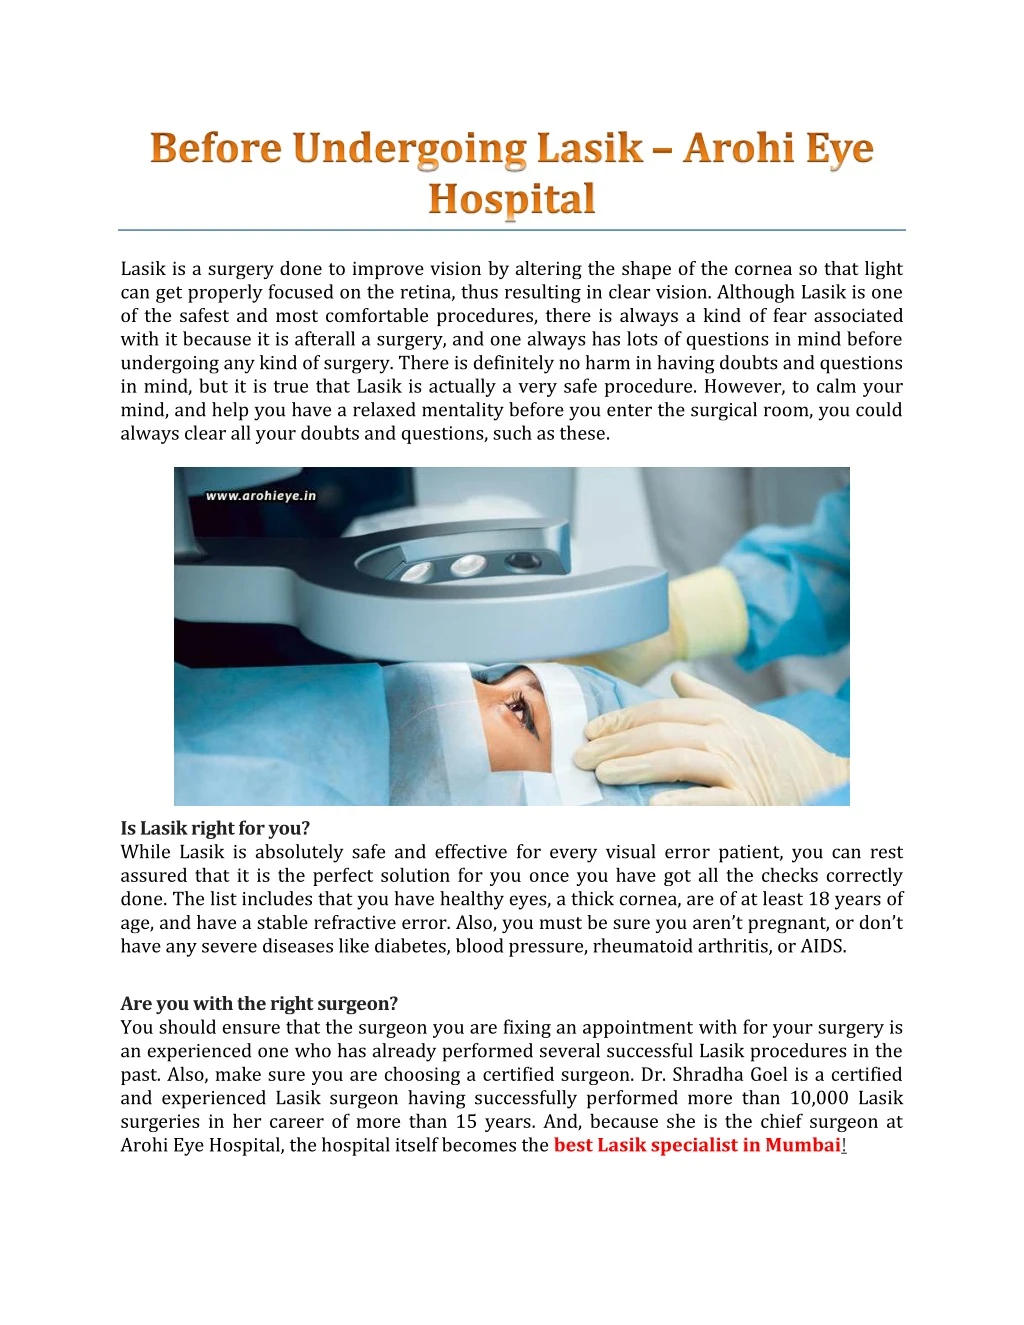 lasik is a surgery done to improve vision